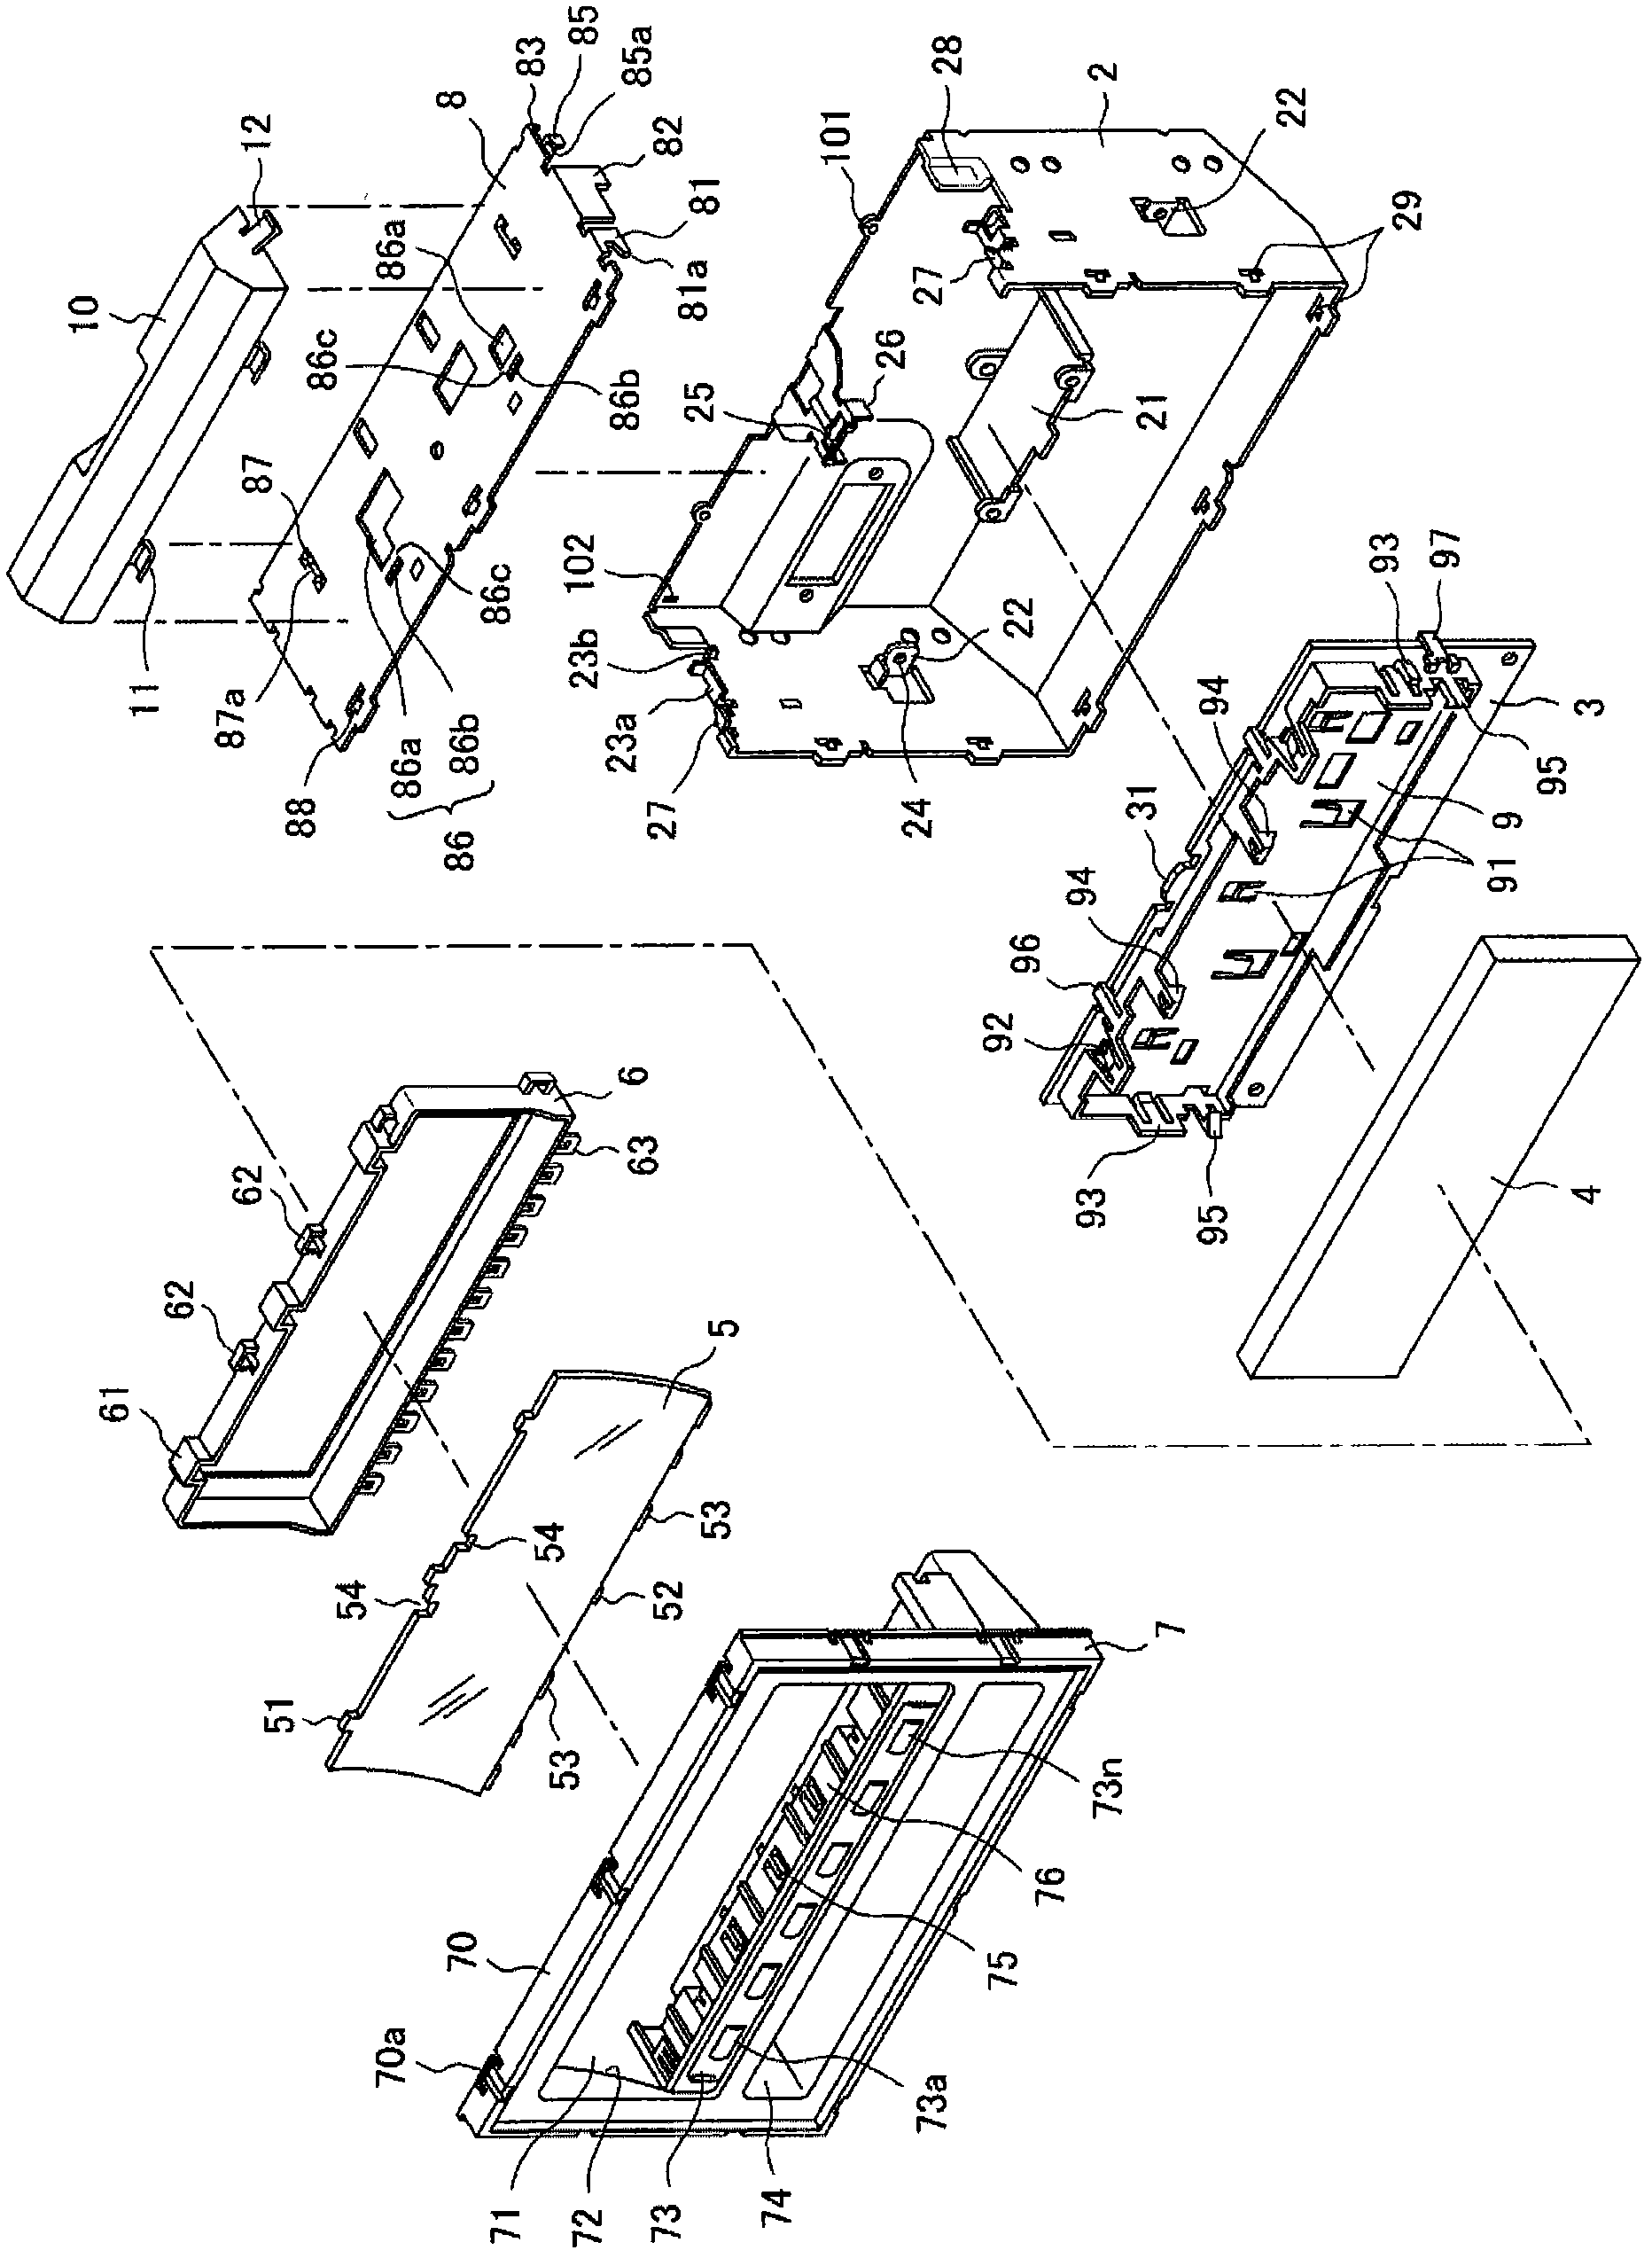 Structure for fastening metallic plate parts together